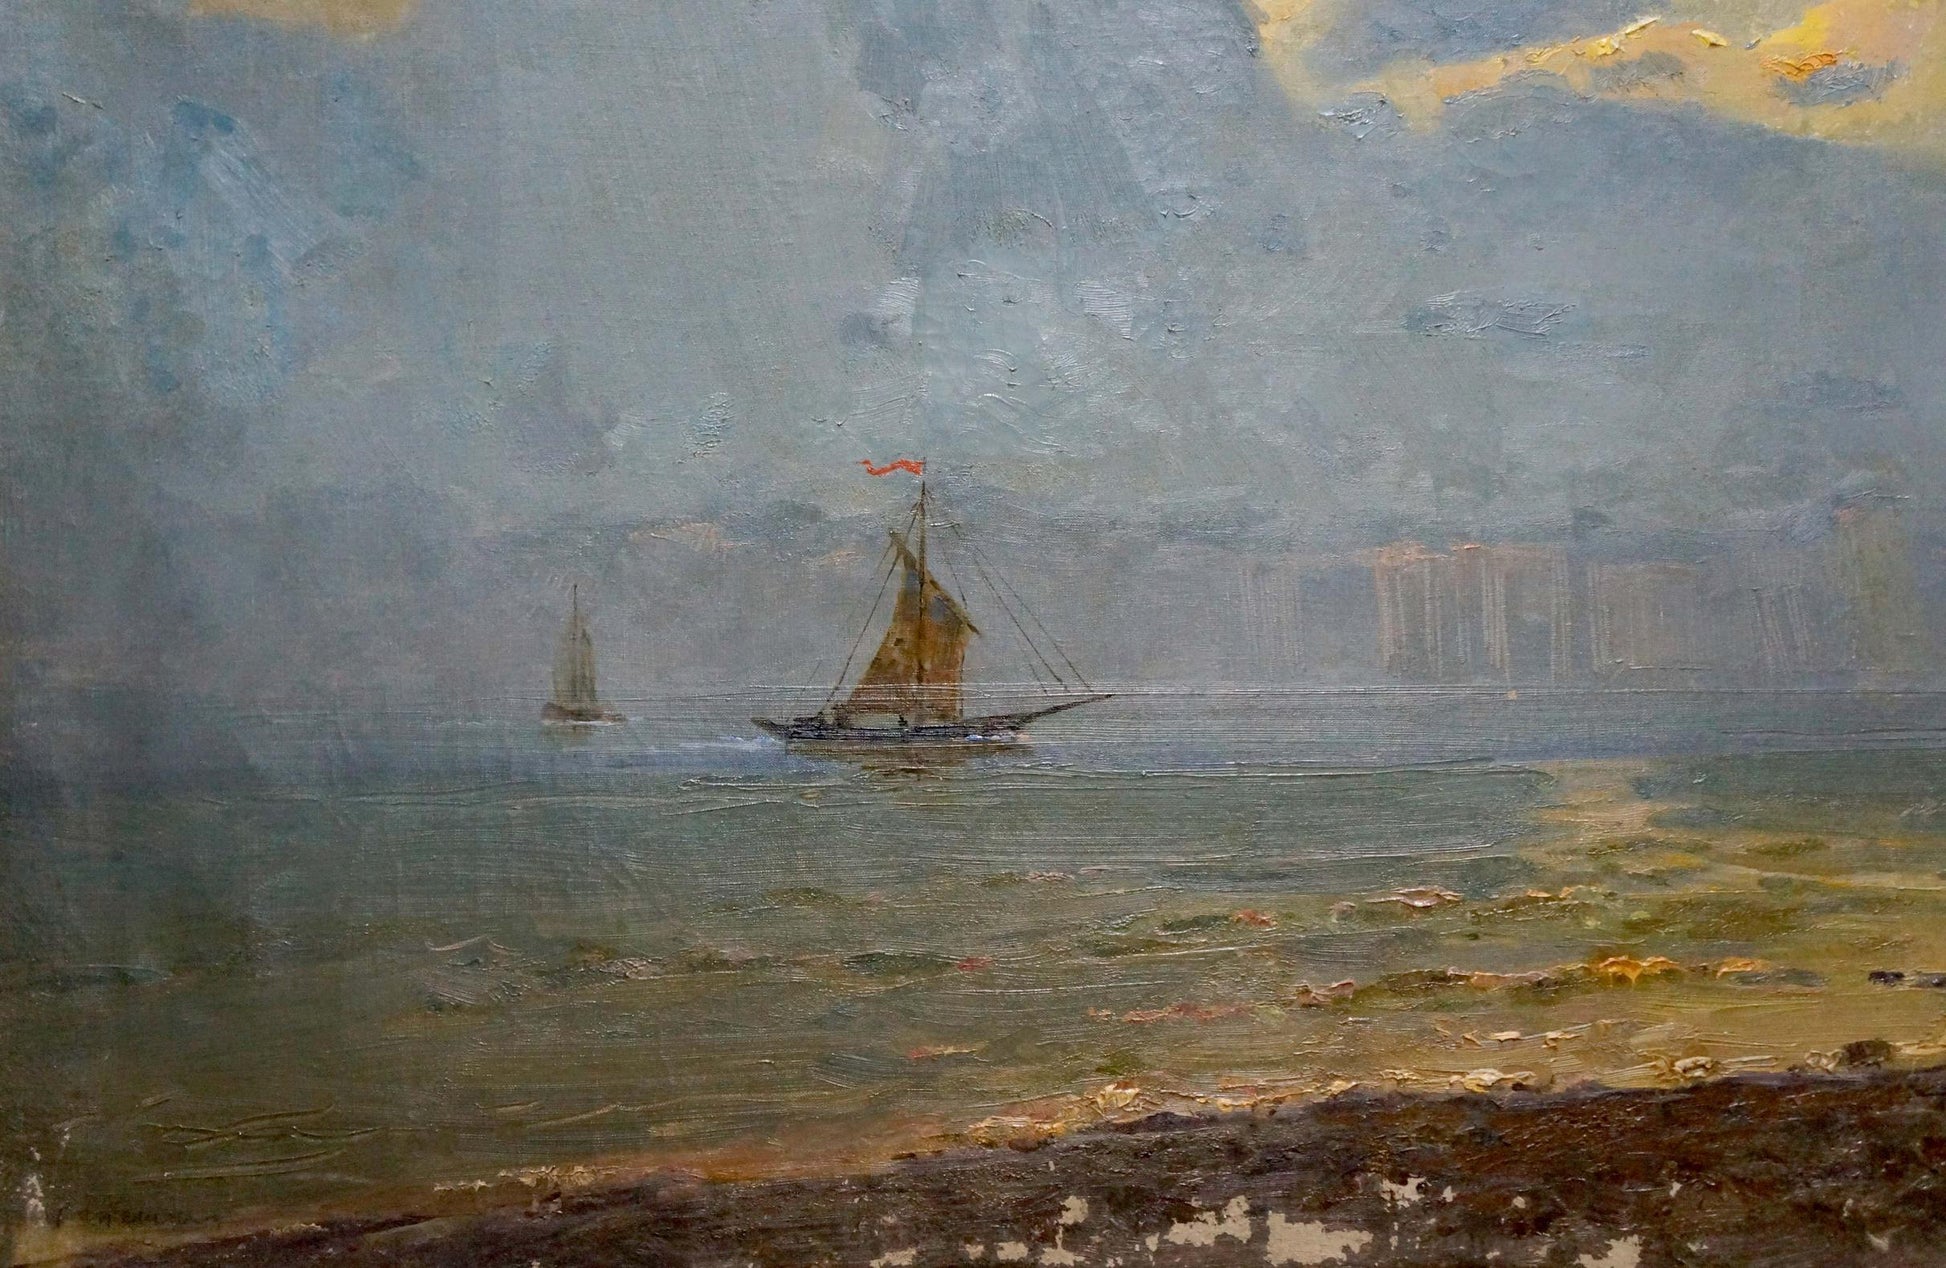 Ships on a serene sea, depicted in an oil painting with an unknown artist